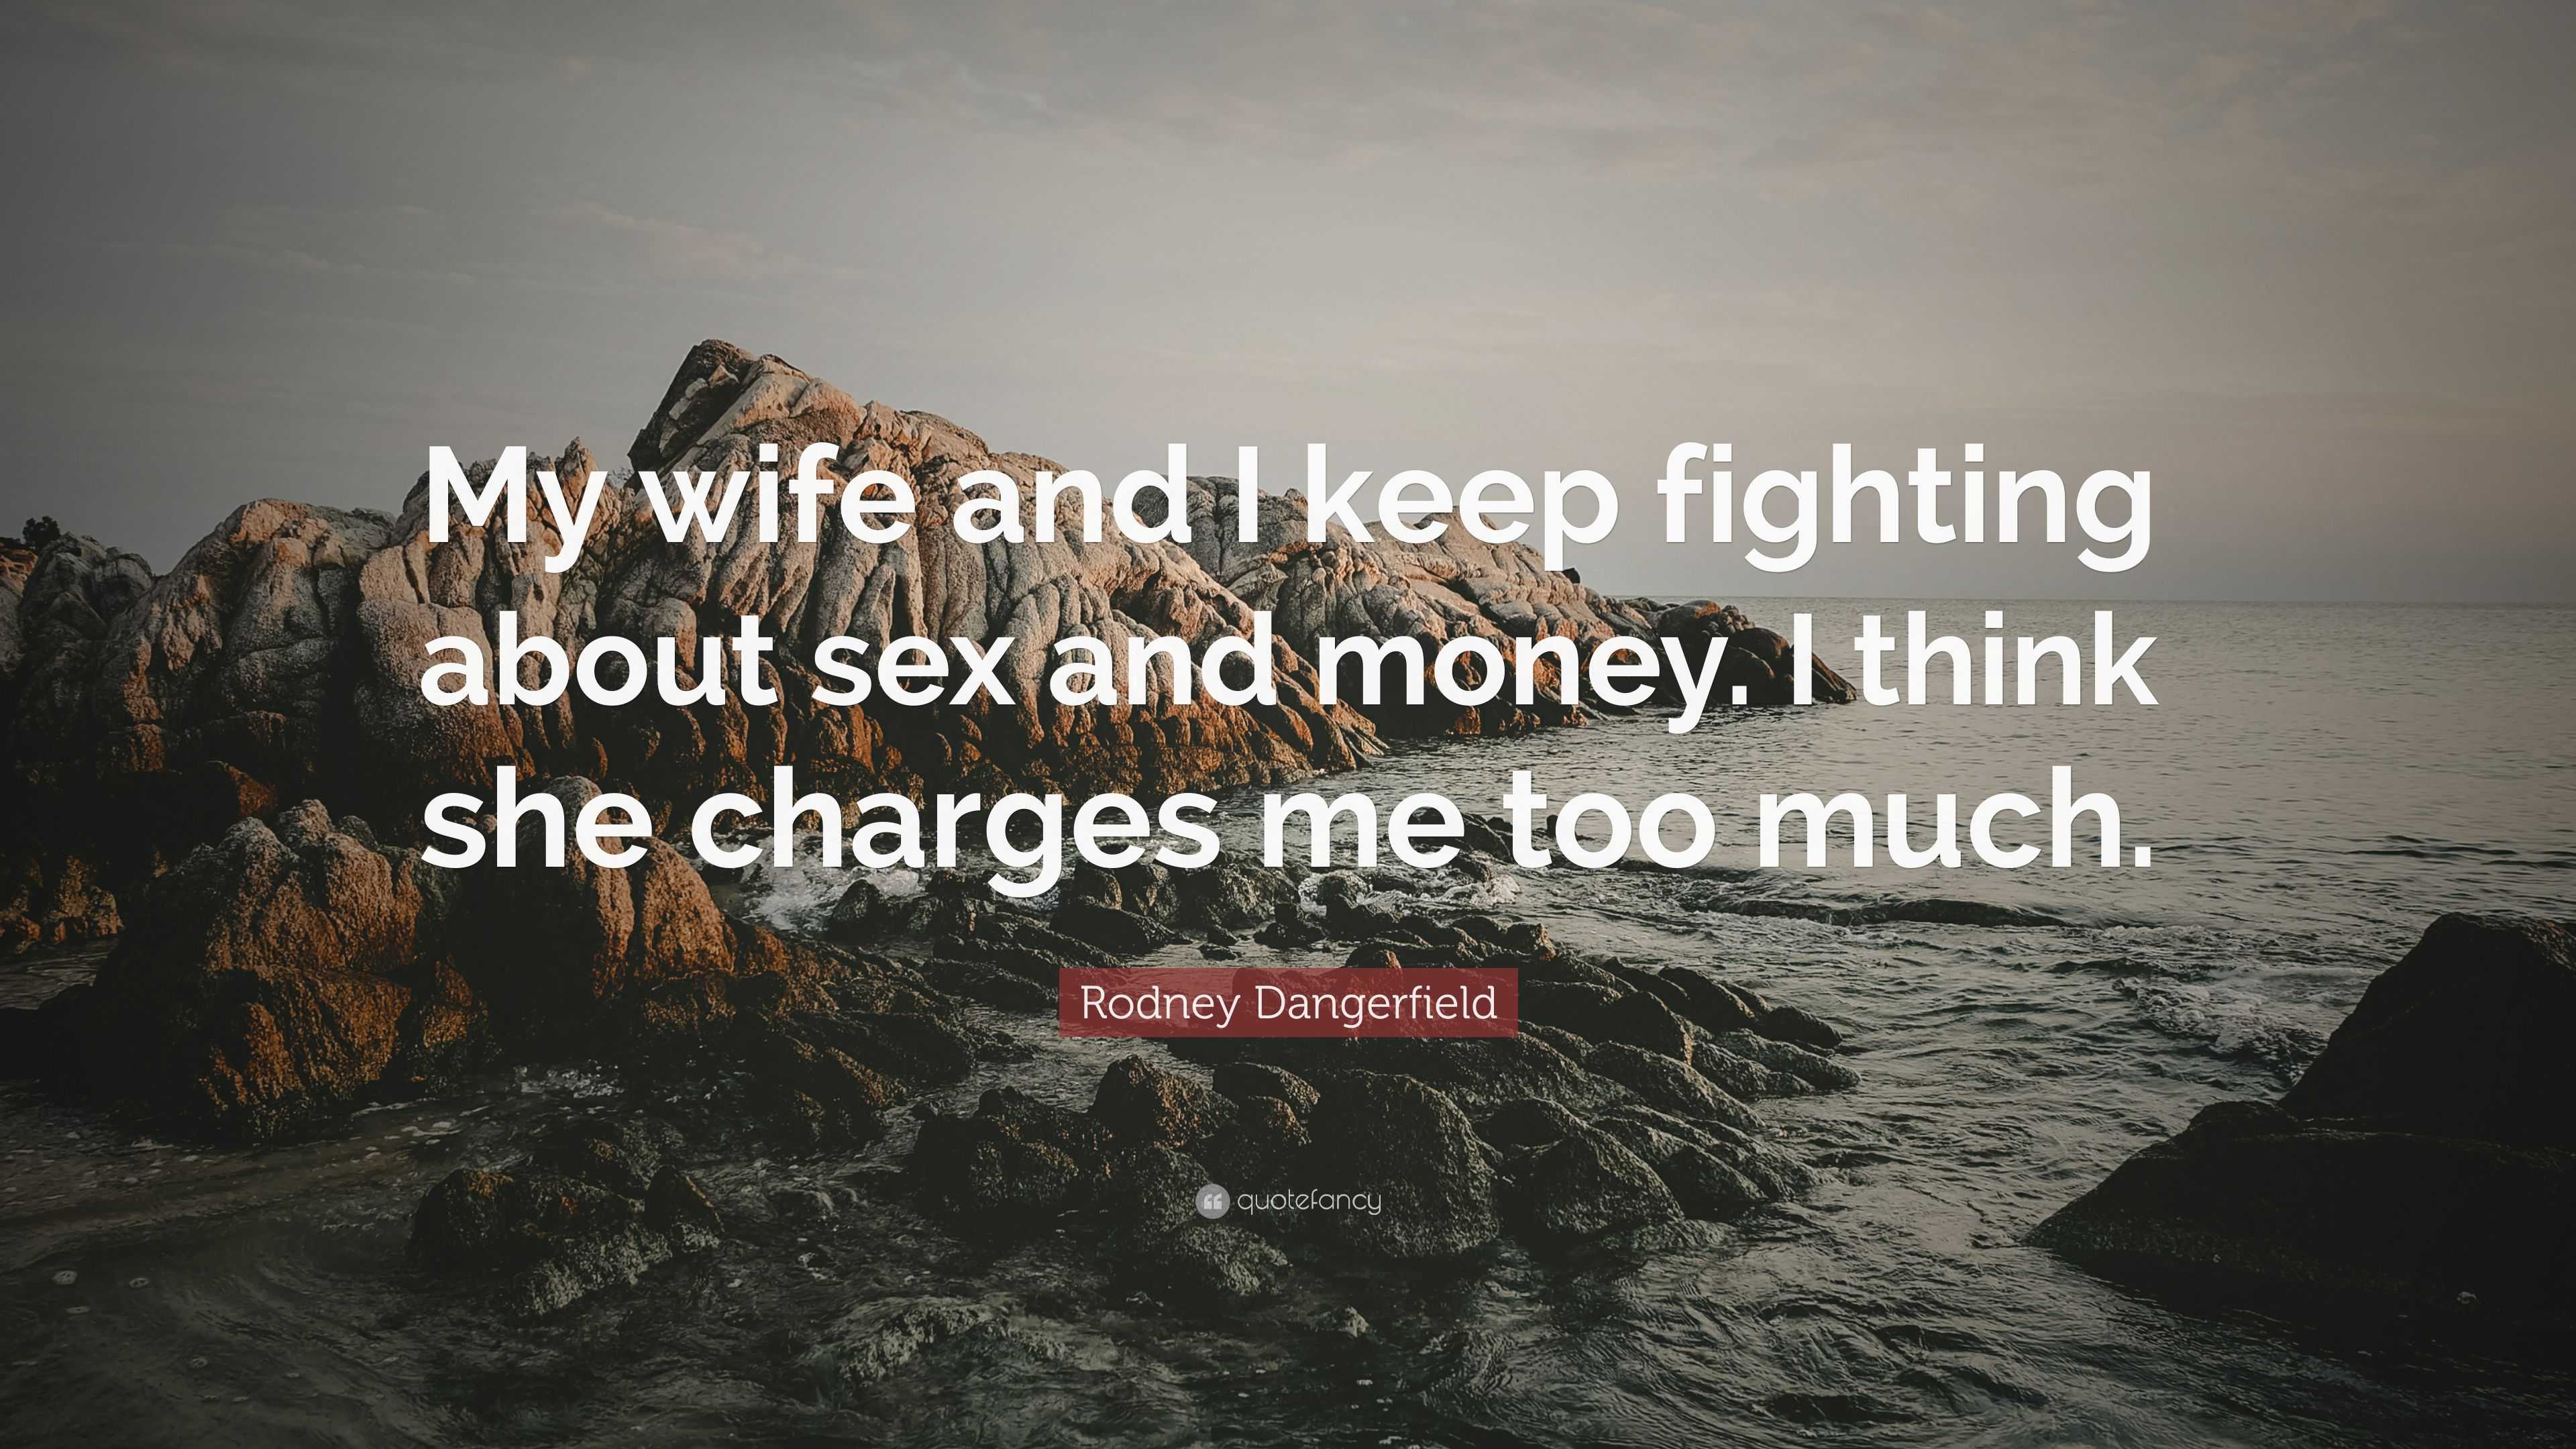 Rodney Dangerfield Quote “My wife and I keep fighting about sex and money picture photo